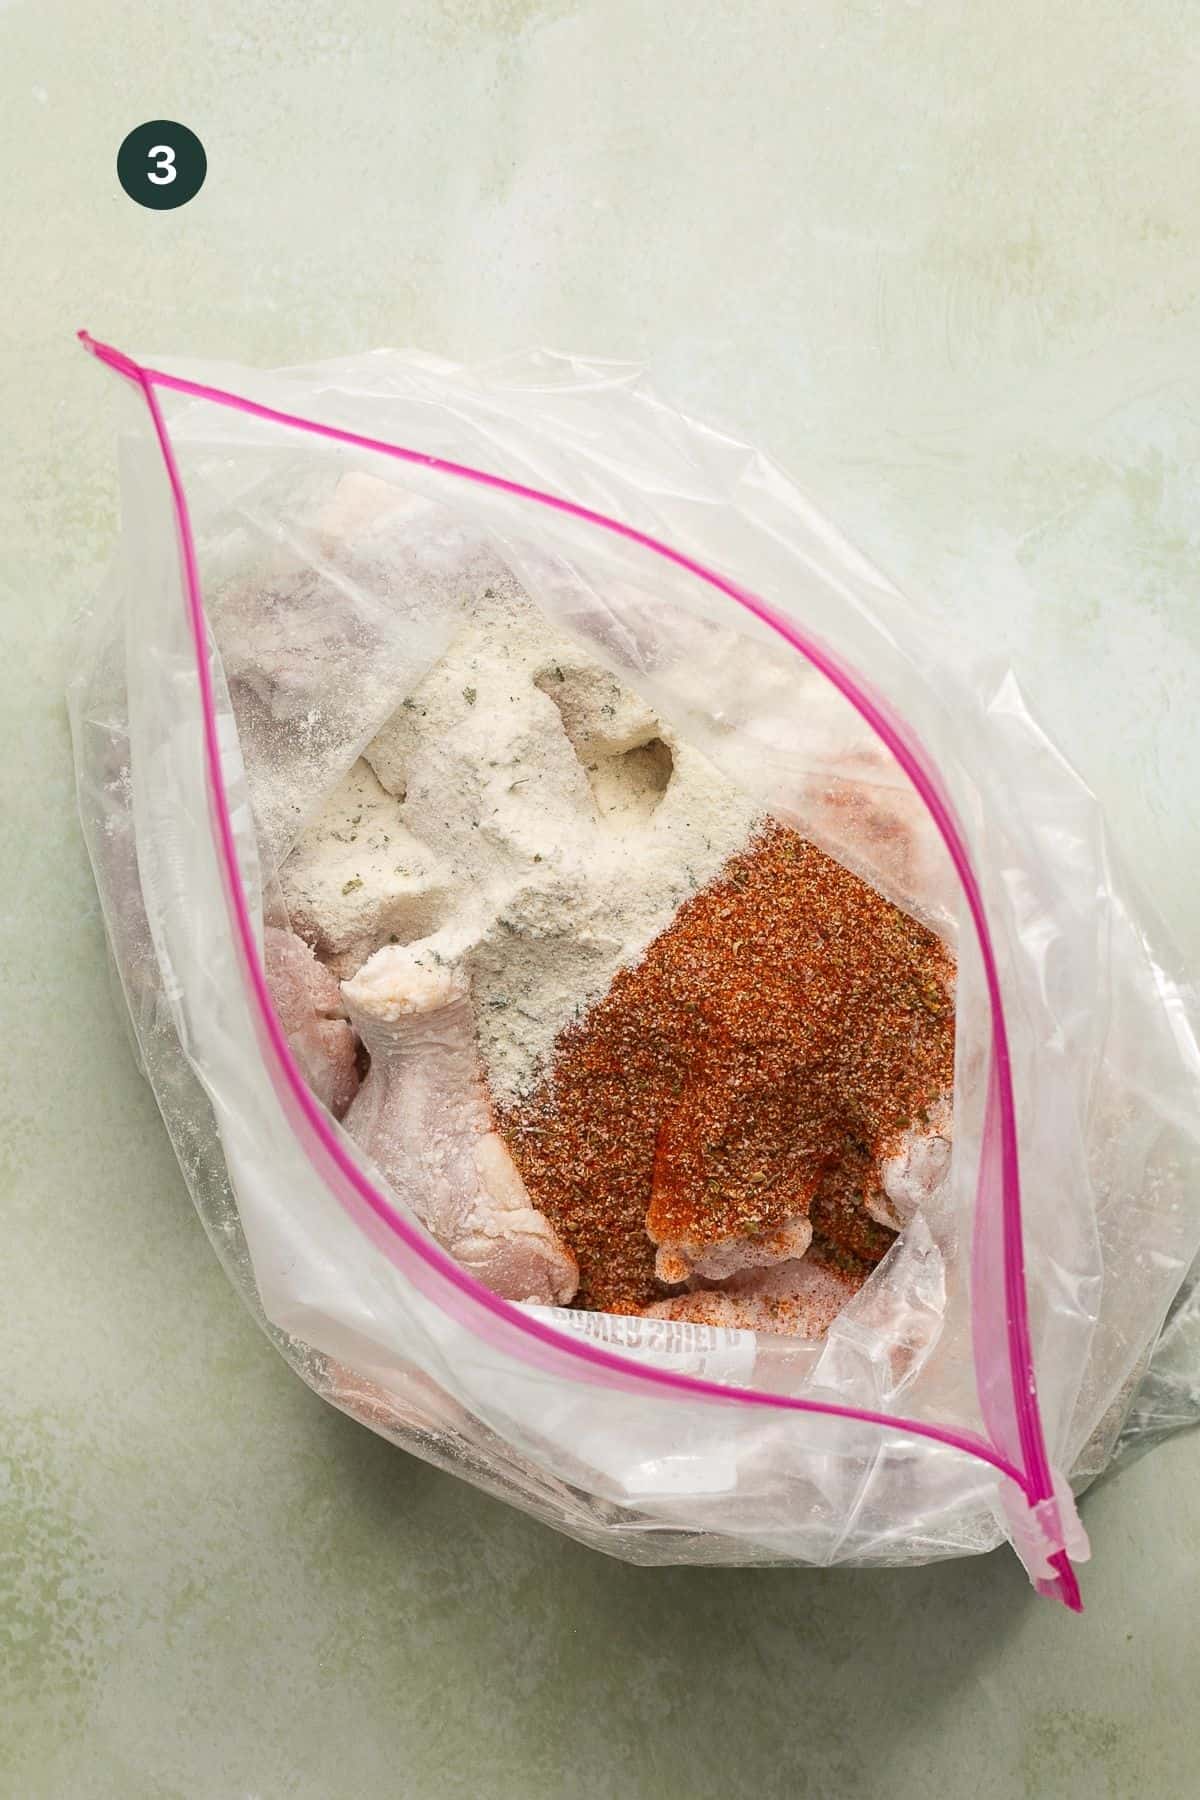 Ranch and cajun seasoning added to the wings in a ziplock bag.